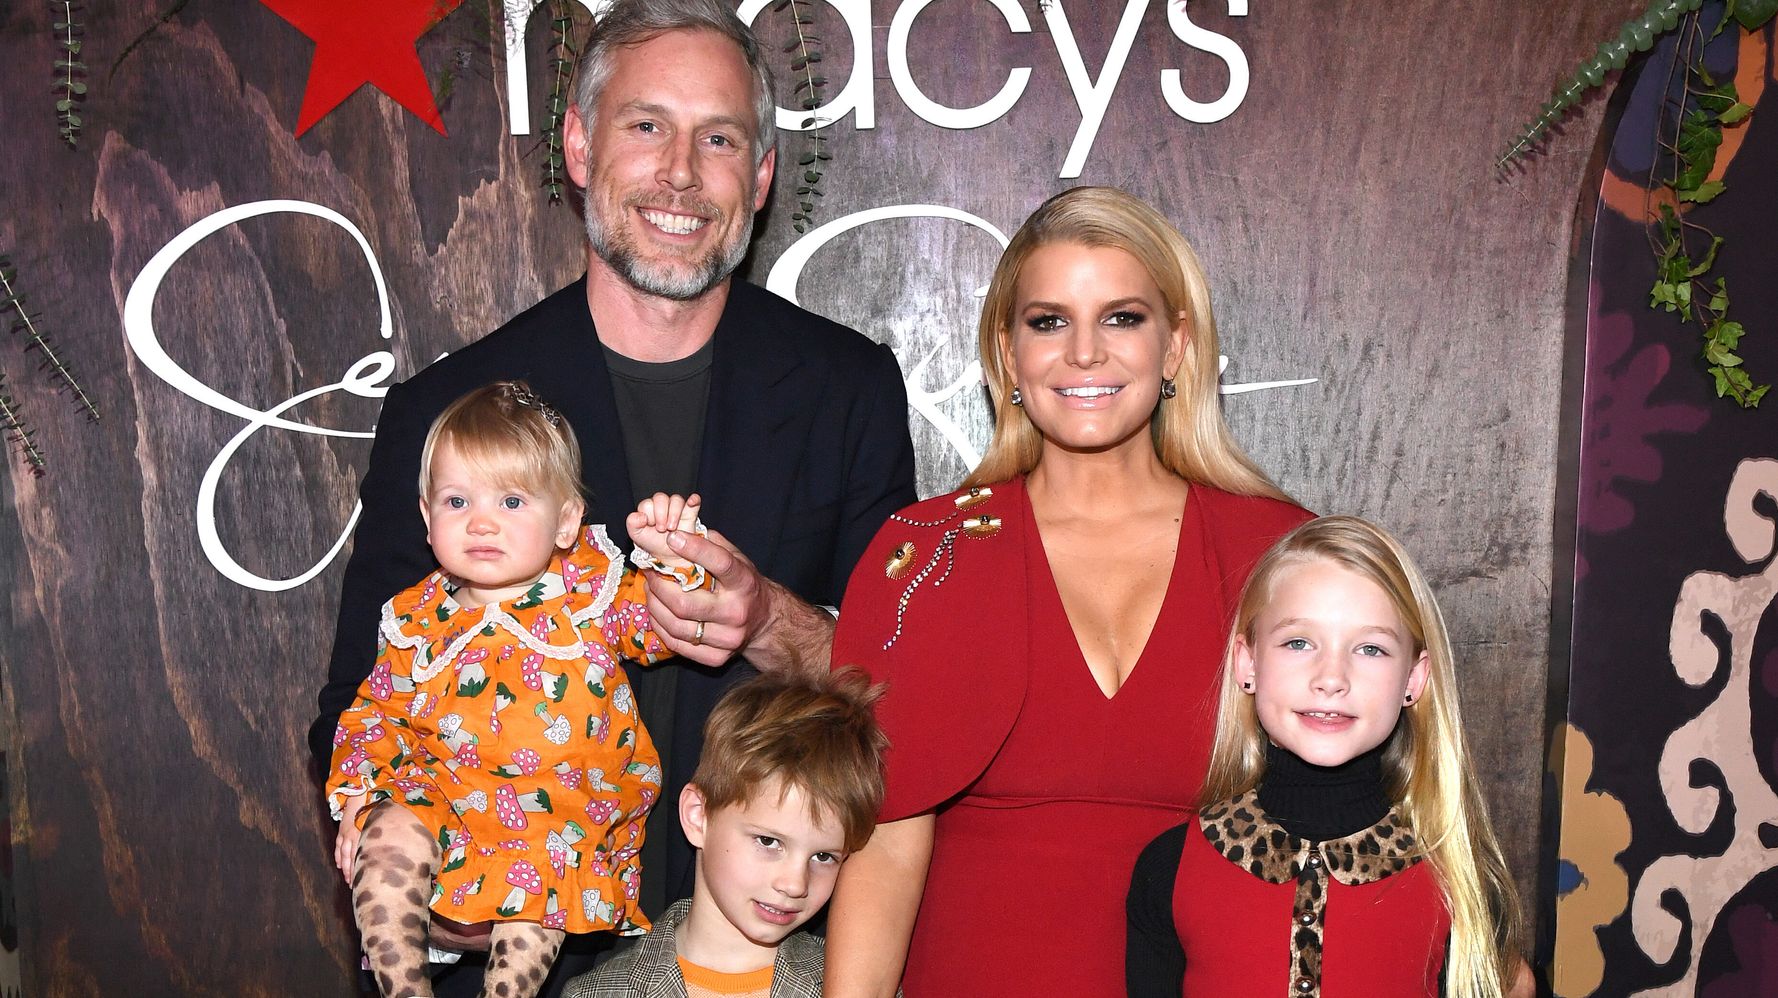 Jessica Simpson Wishes Her Daughter Maxwell a Happy 10th Birthday